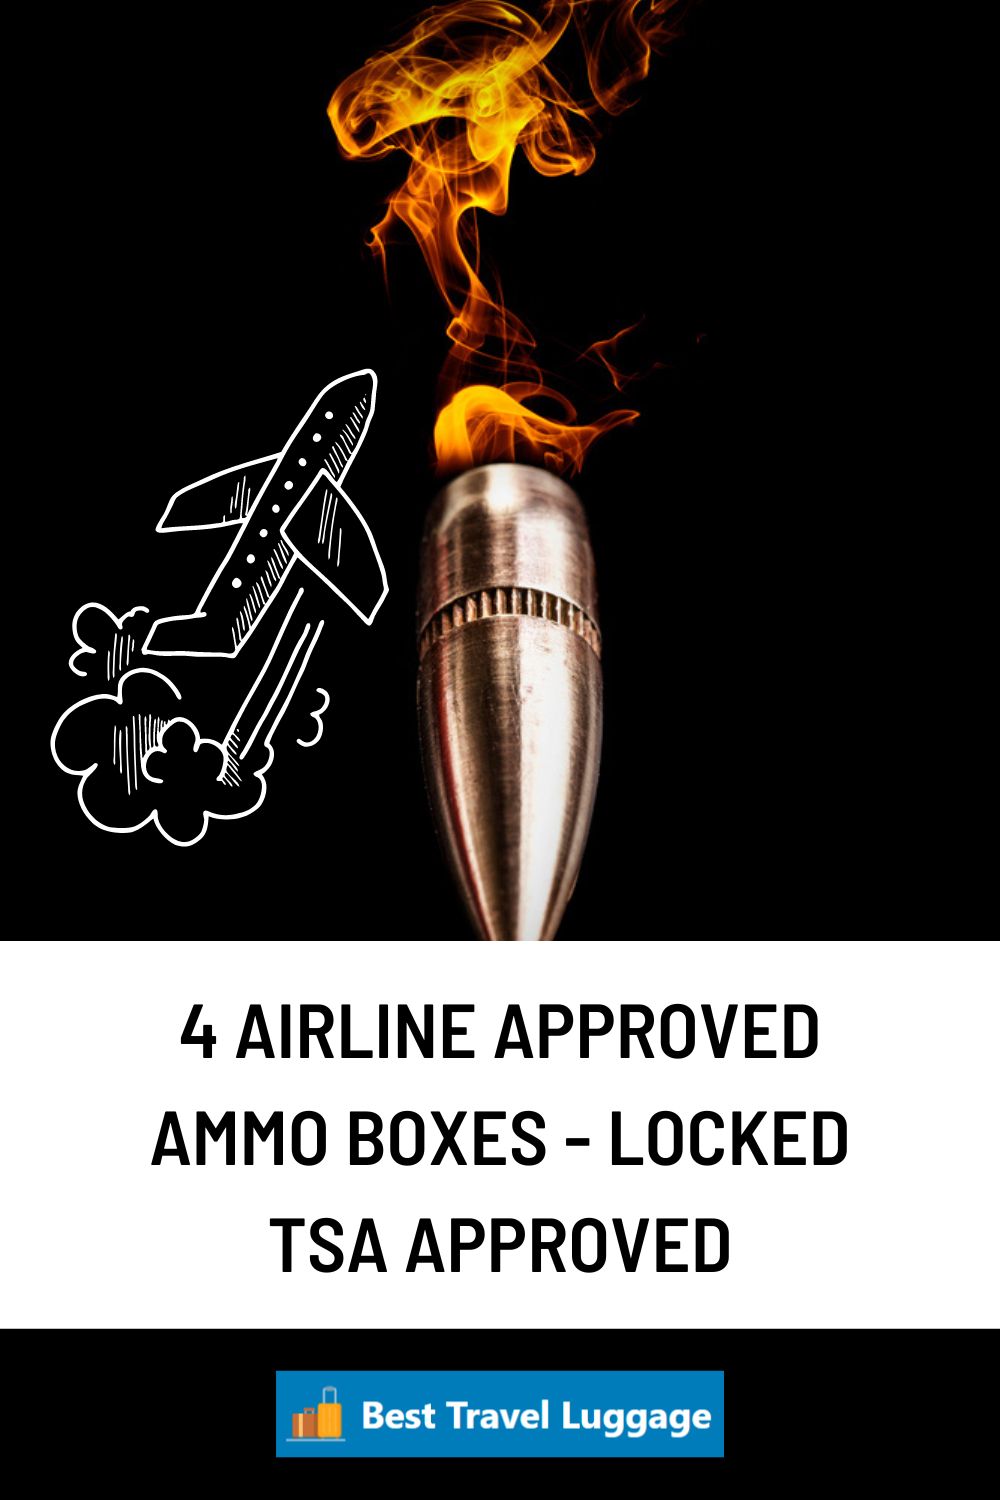 airline approved ammo boxespin